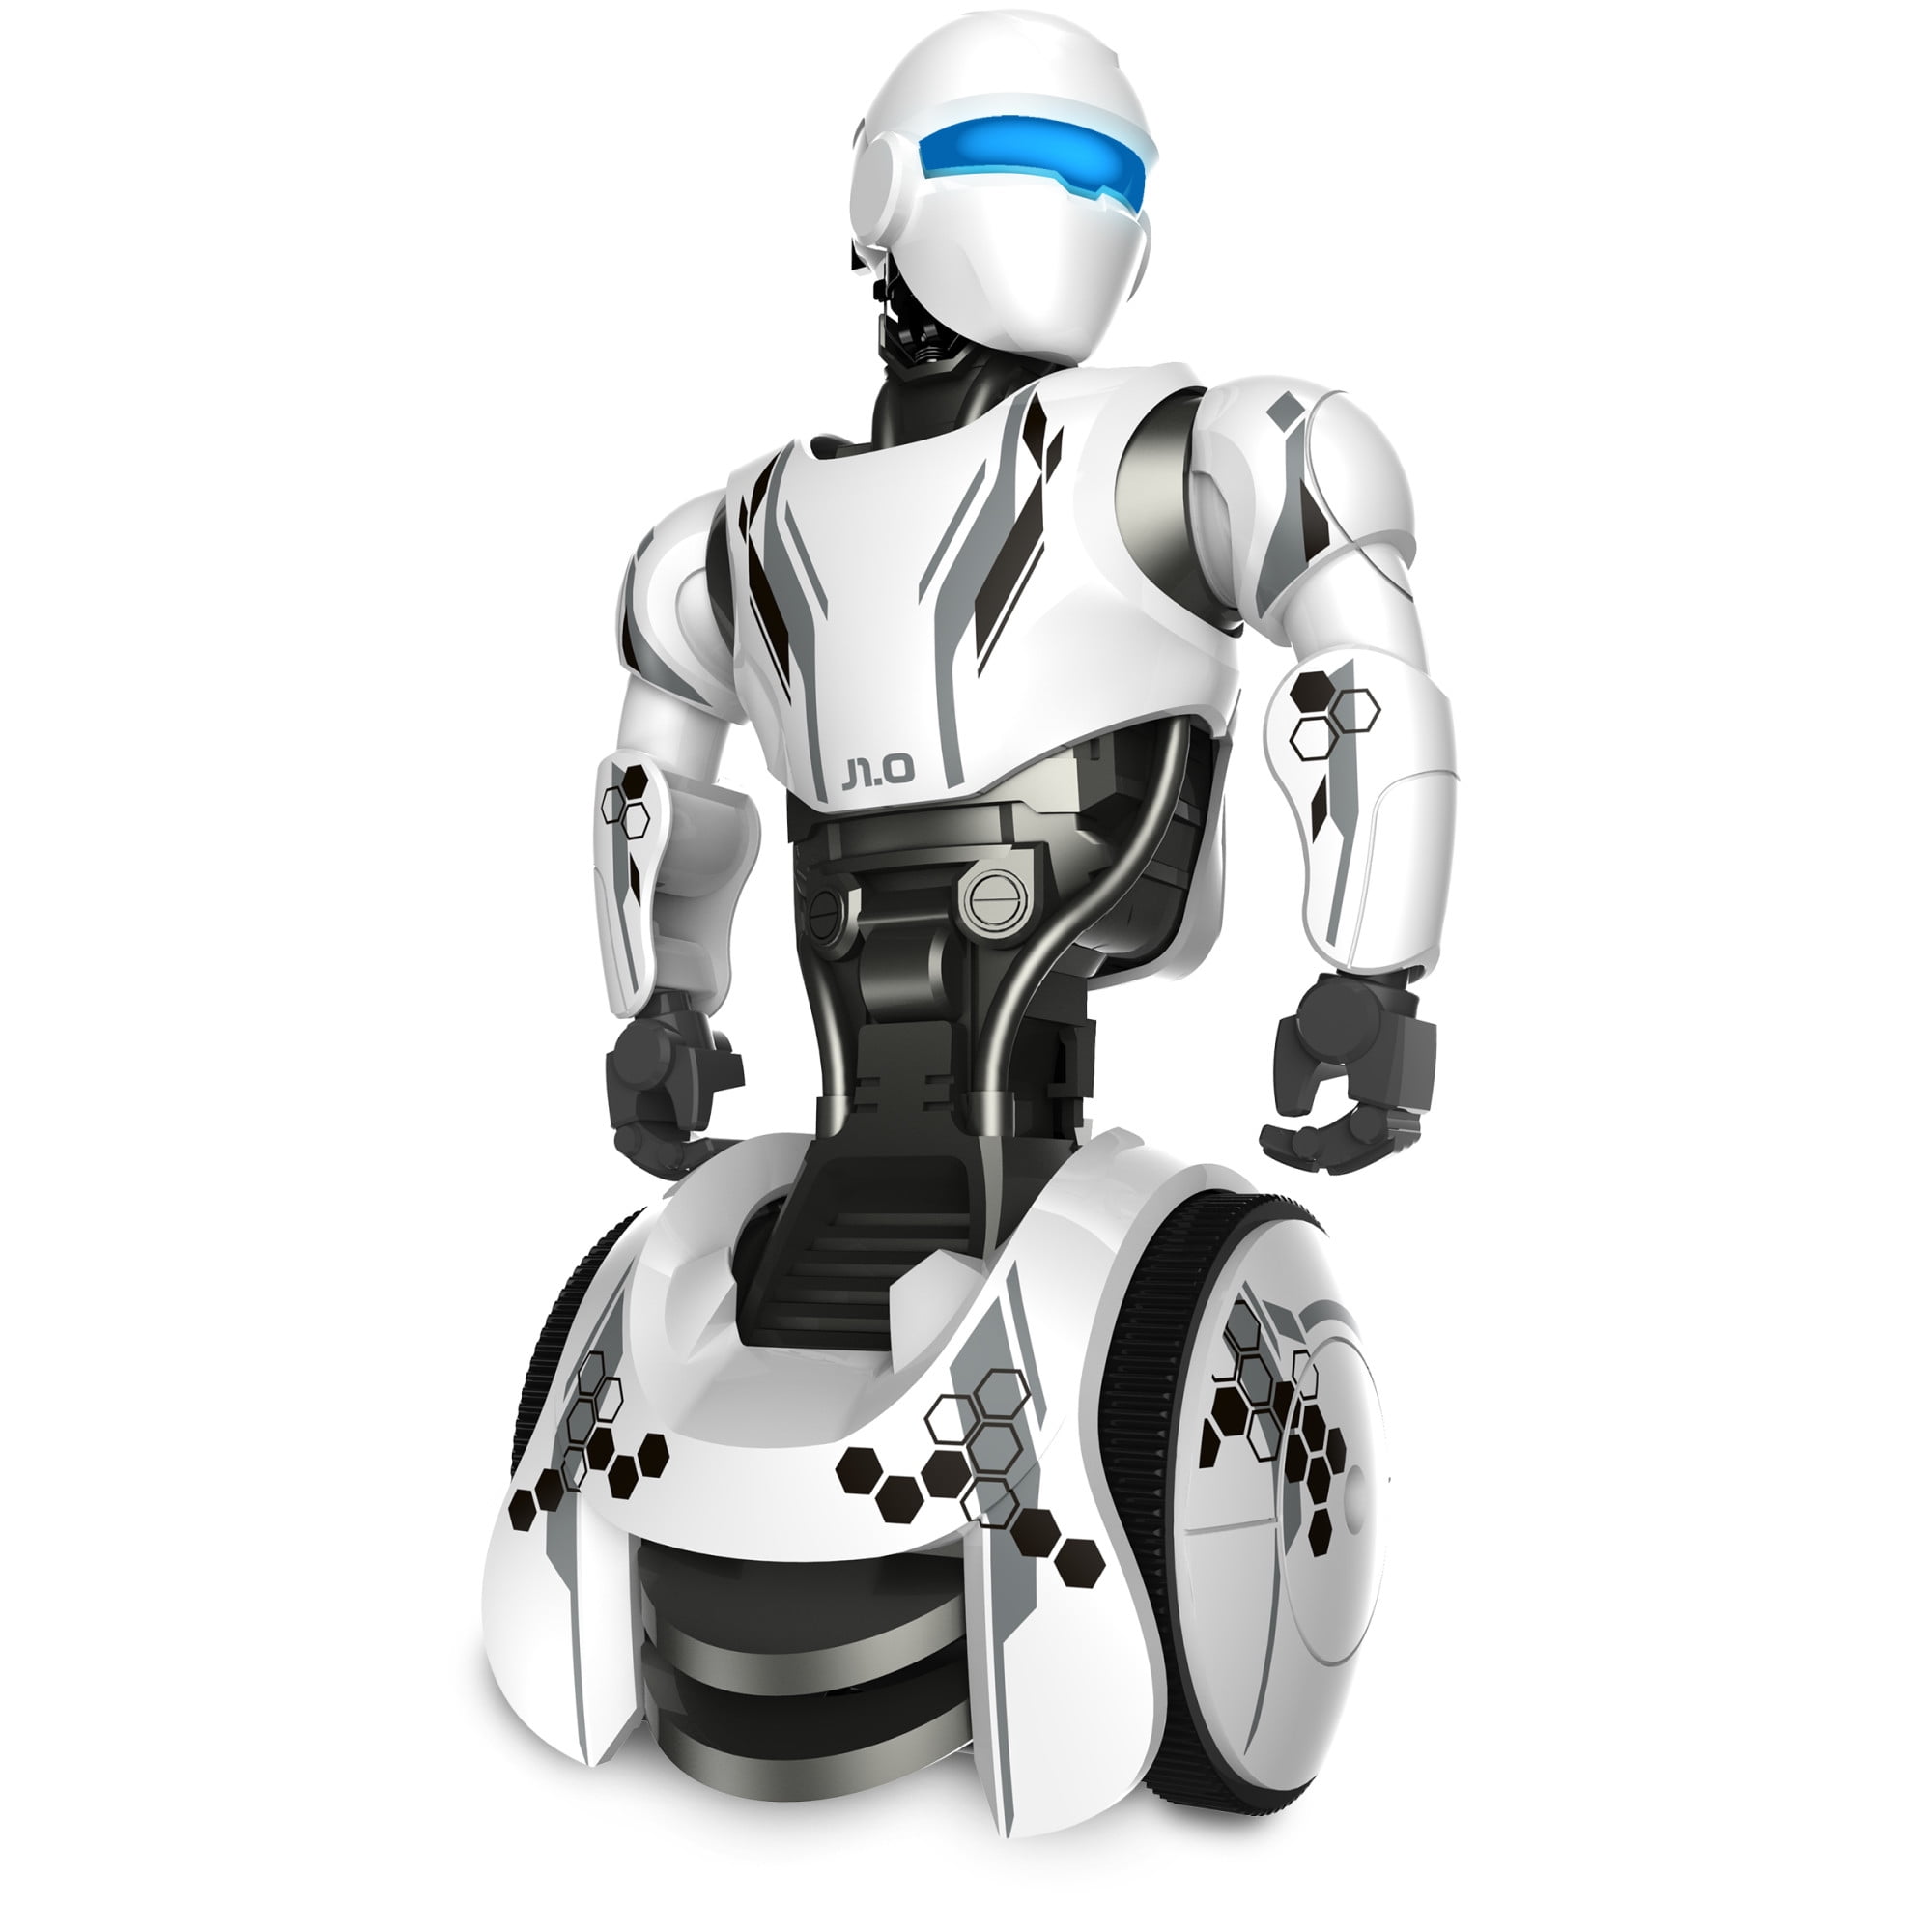 af i morgen Hovedkvarter SHARPER IMAGE RC Humanoid OP One Robot, Cool Sci-Fi Android with Moving  Arms and Gripping Hands, Dances, Plays, Performs, Spy Mode, Voice, Wireless  Control, Full Directional Movement, Battery Power - Walmart.com